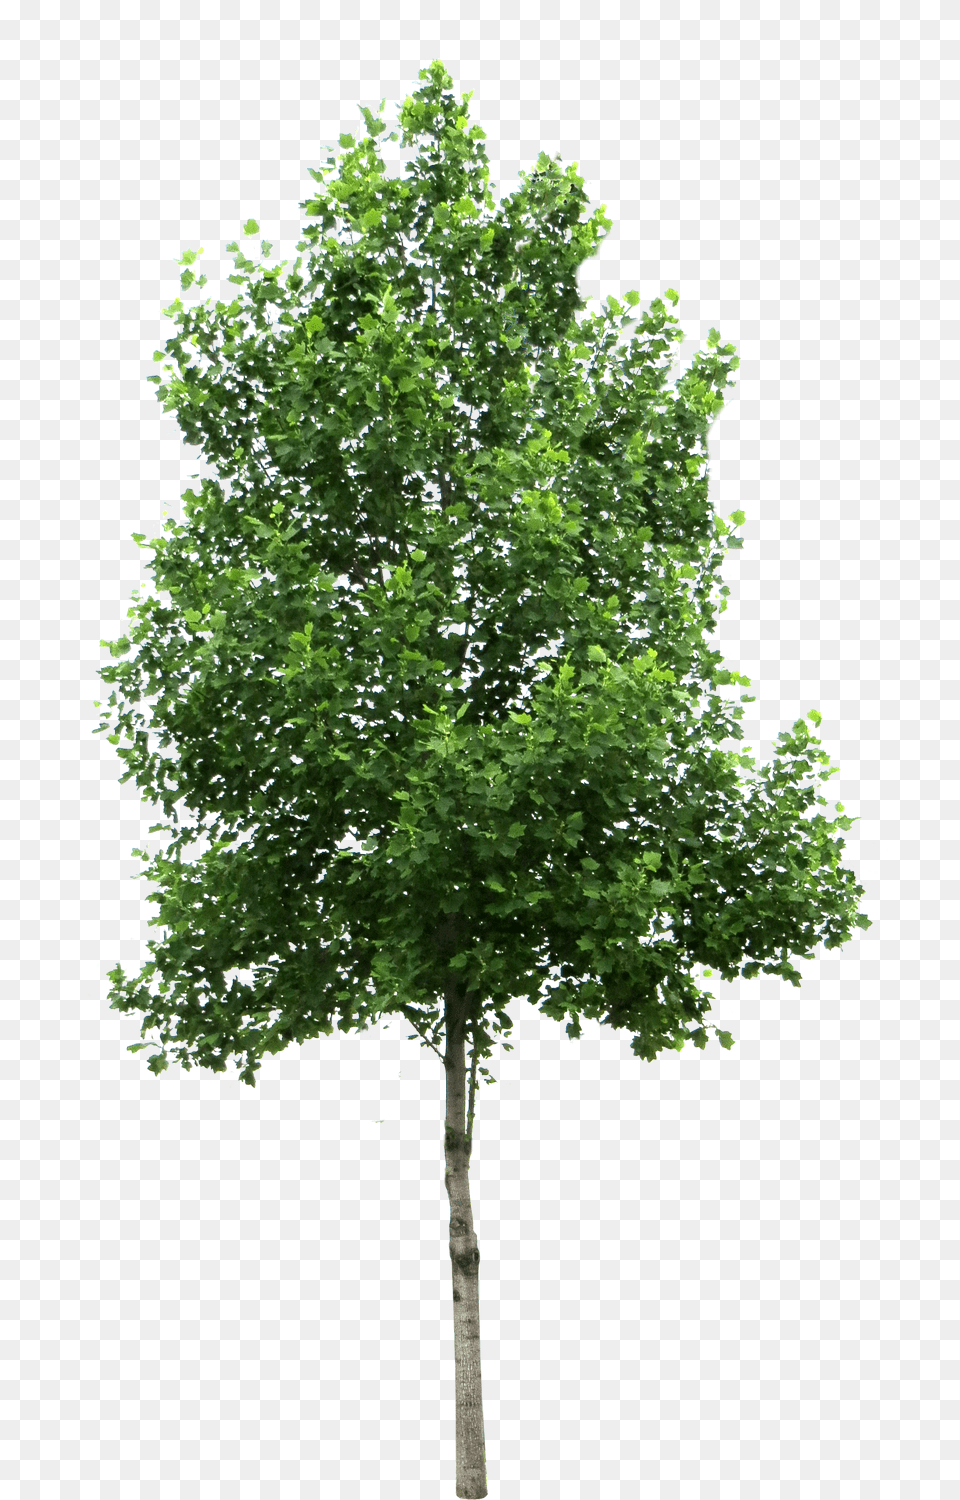 Tree, Maple, Oak, Plant, Sycamore Png